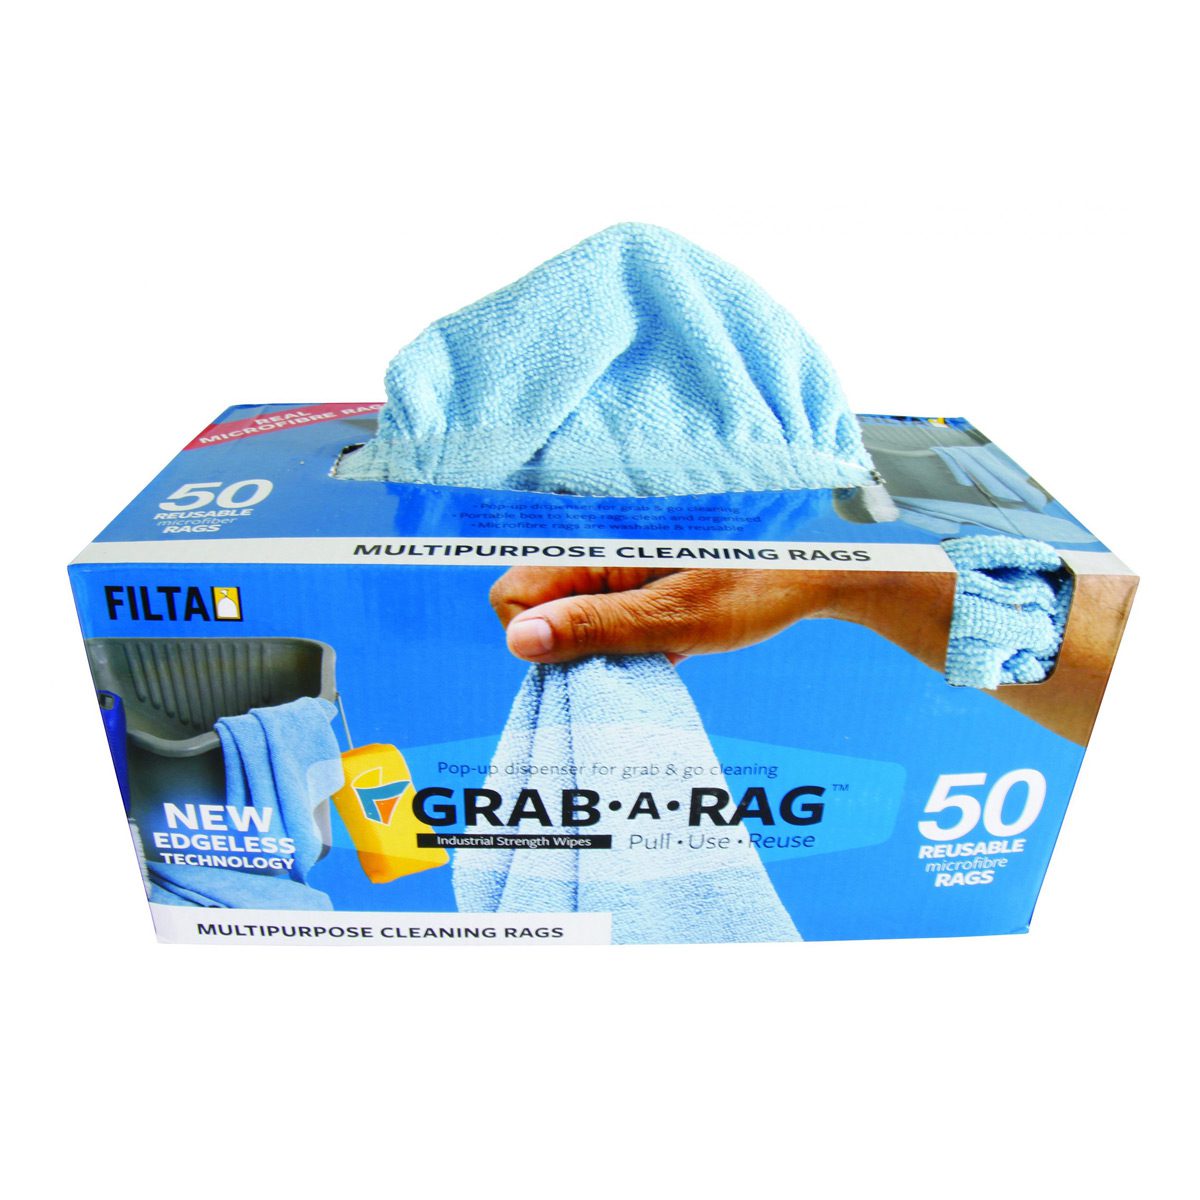 cleaning-equipment-microfibre-grab-a-rag-microfibre-rags-non-abrasive-microfibre-cloths-with-edgeless-technology-sold-in-box-50-blue-rags-300x300mm-each-vjs-distributors-39999SKU